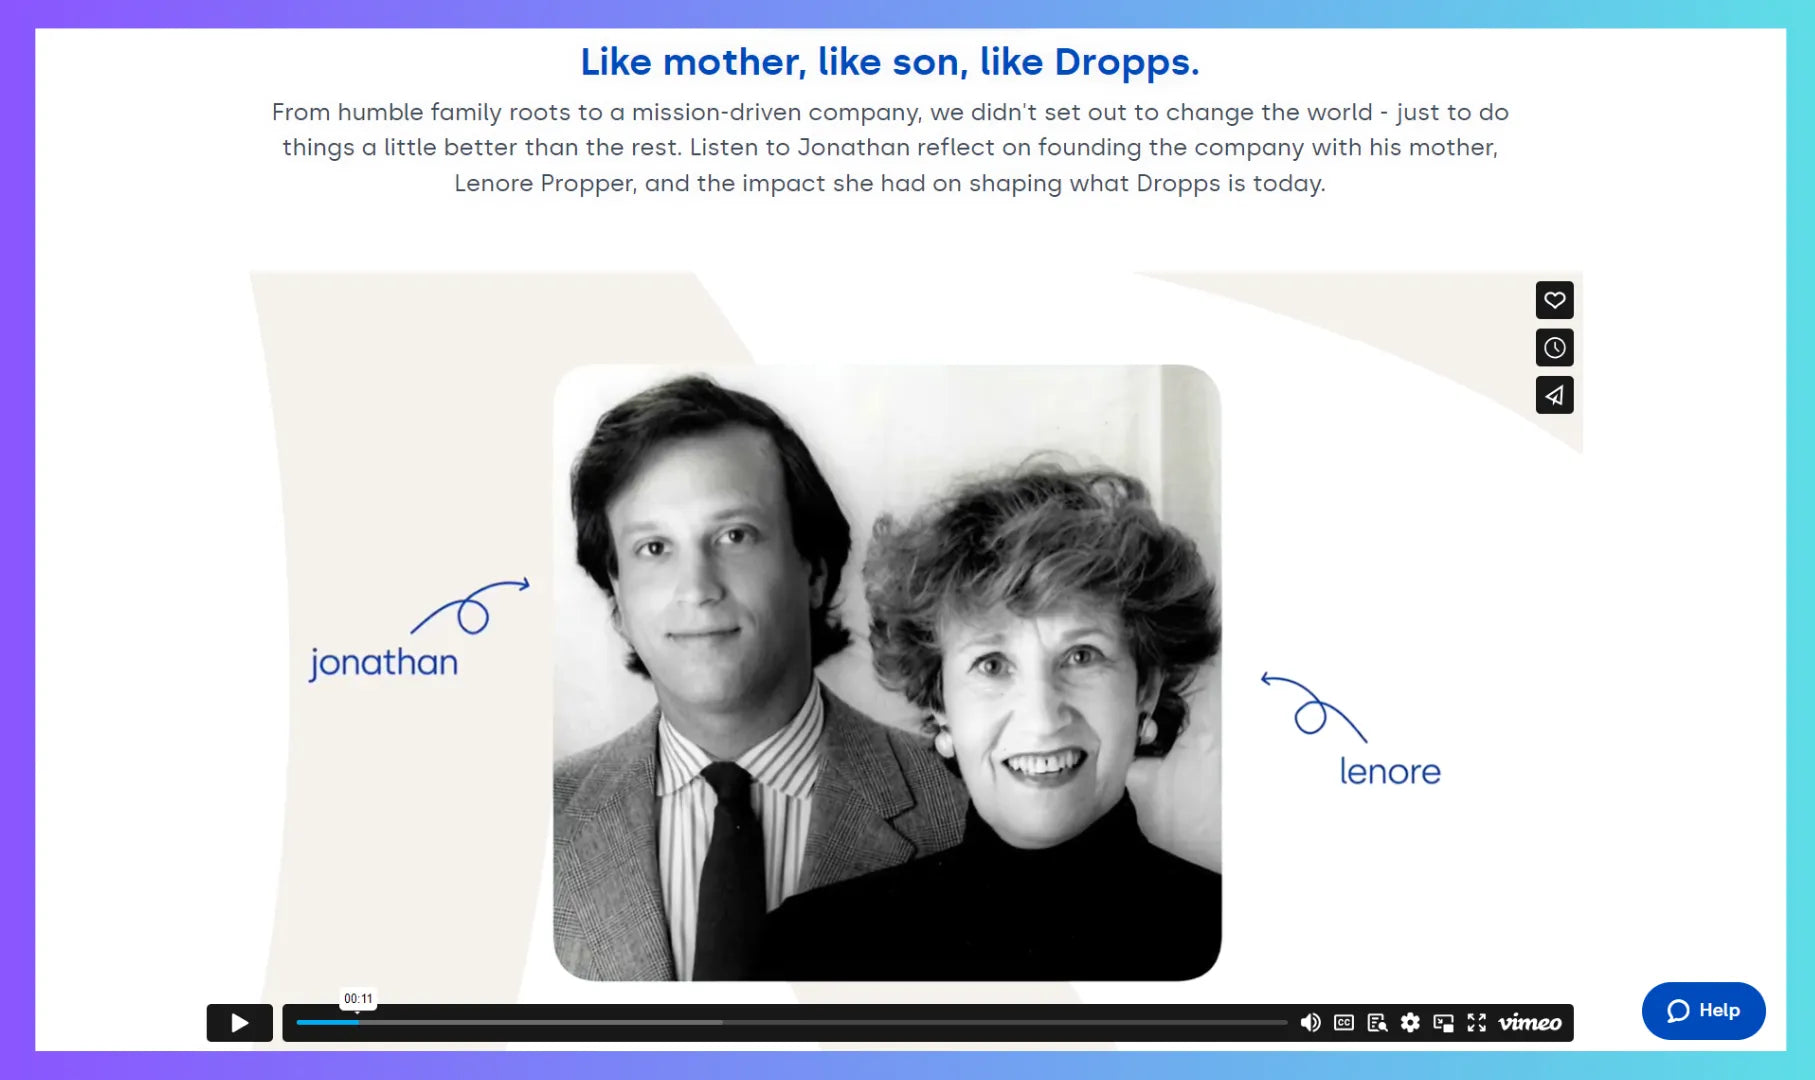 The Dropps Story page